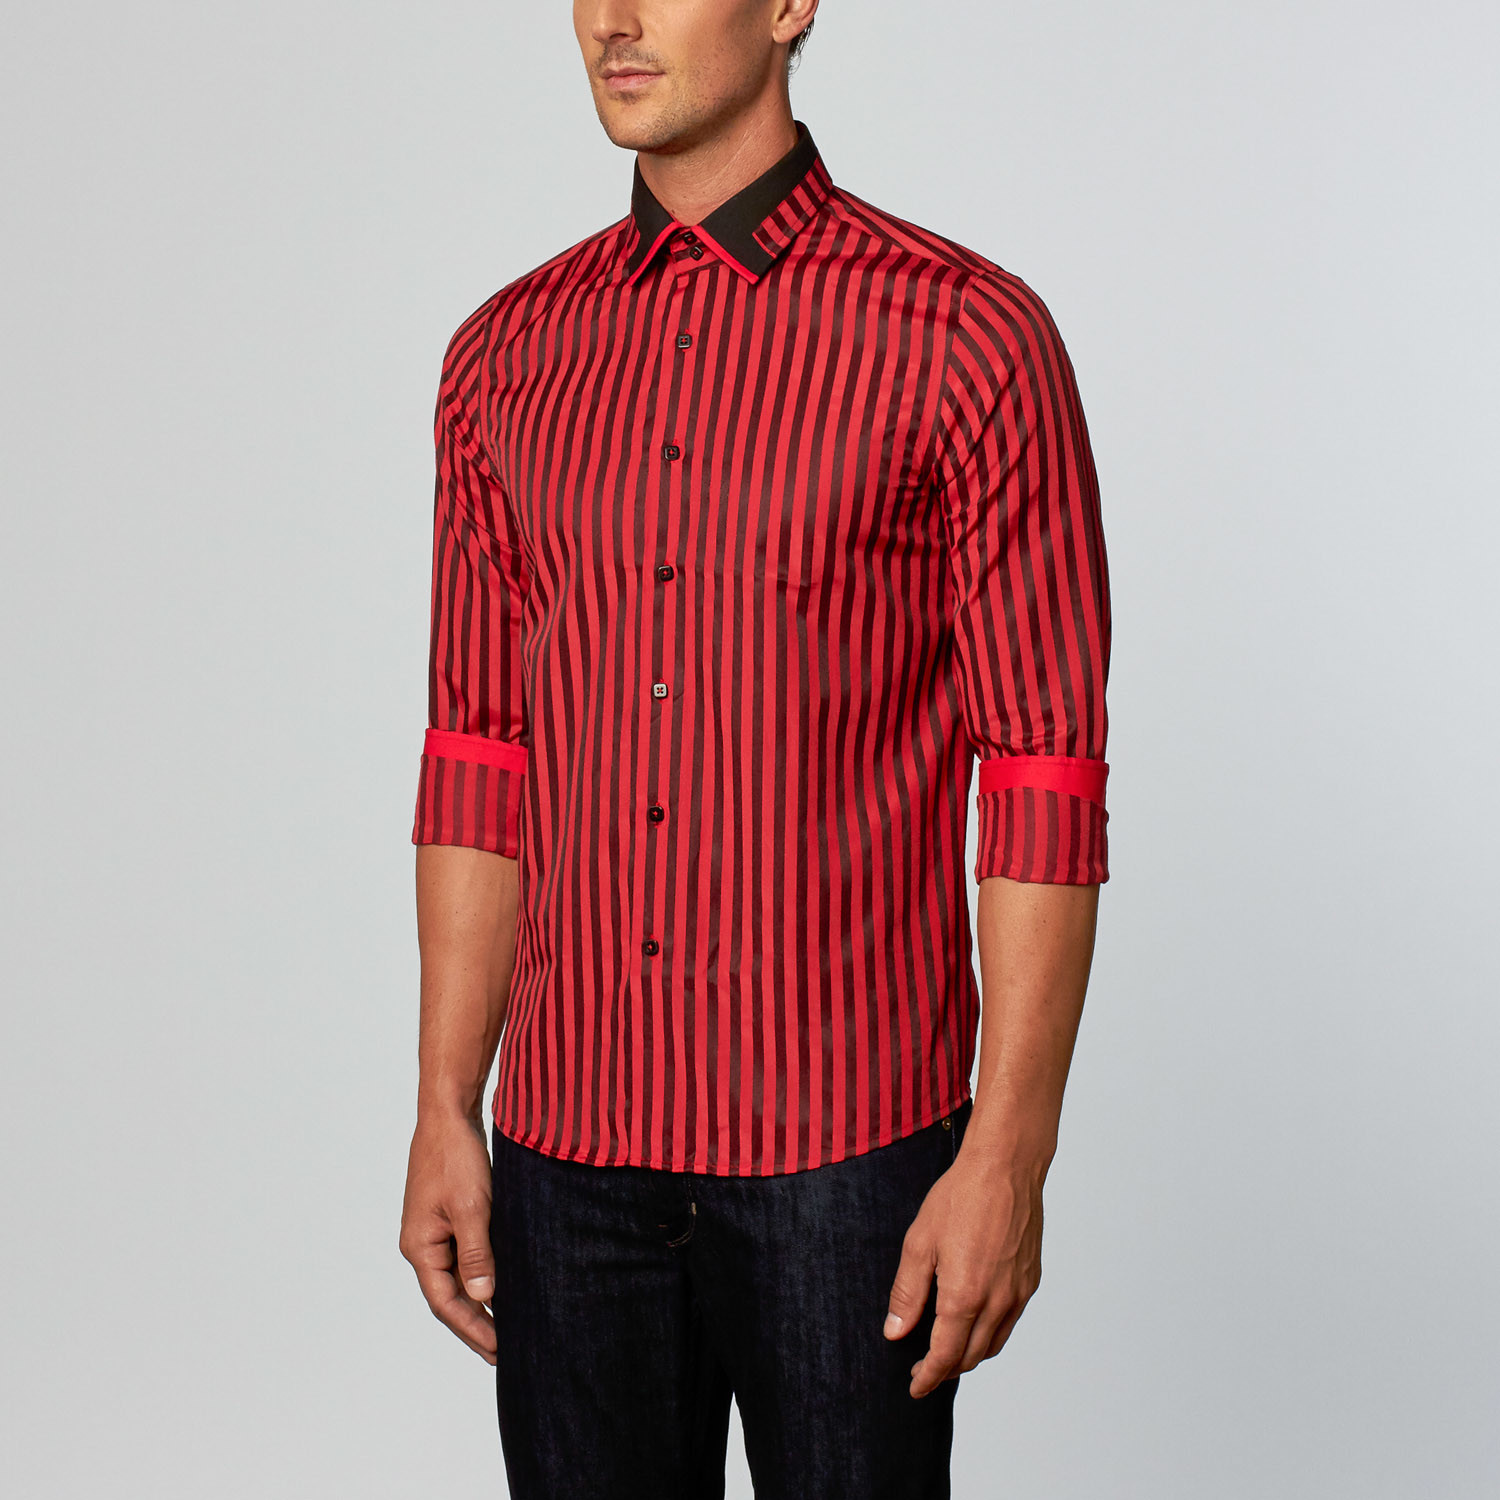 black dress shirt with red collar